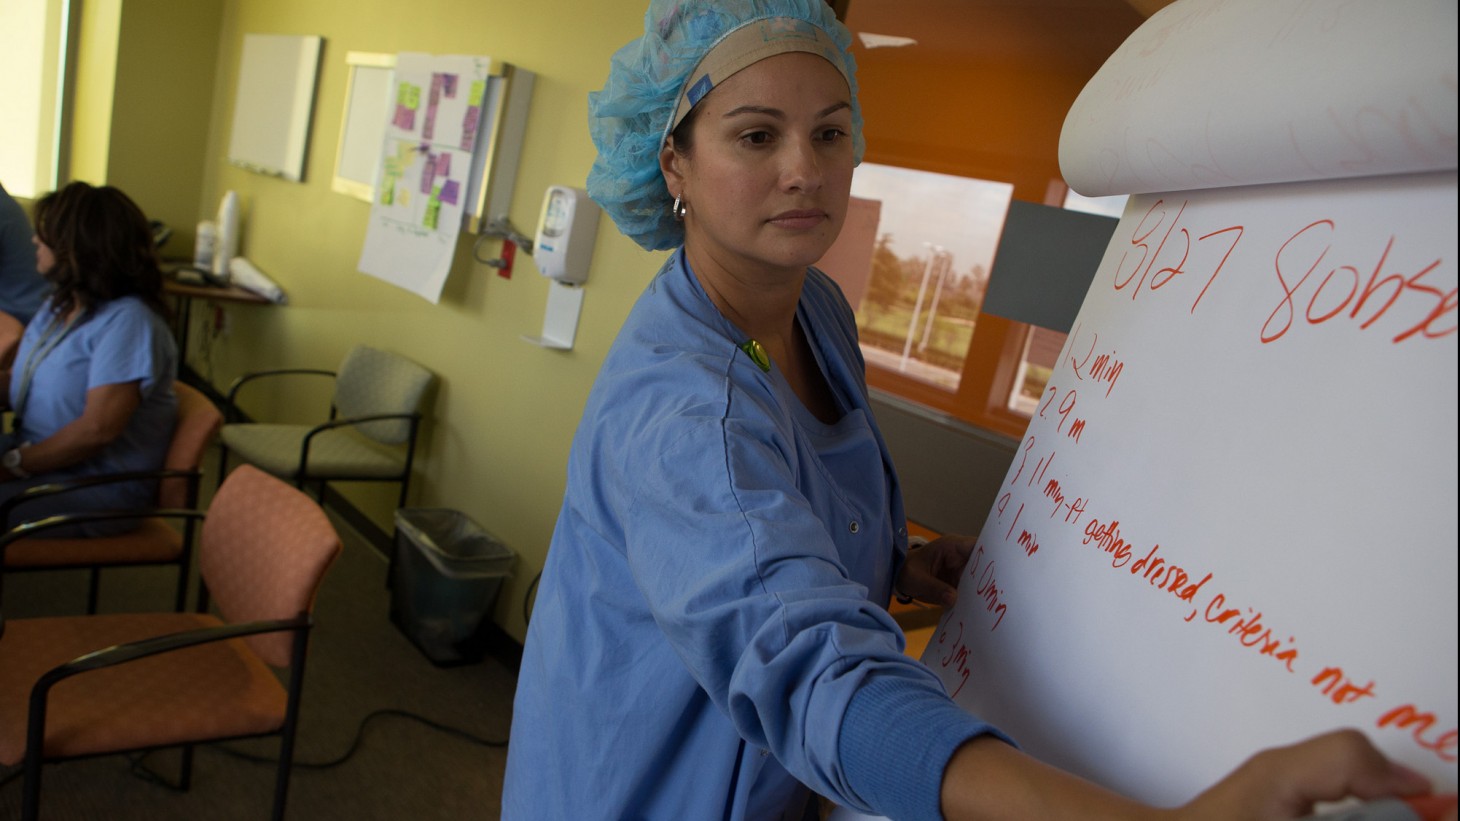 Health care worker in blue hairnet writing on a flip chart 